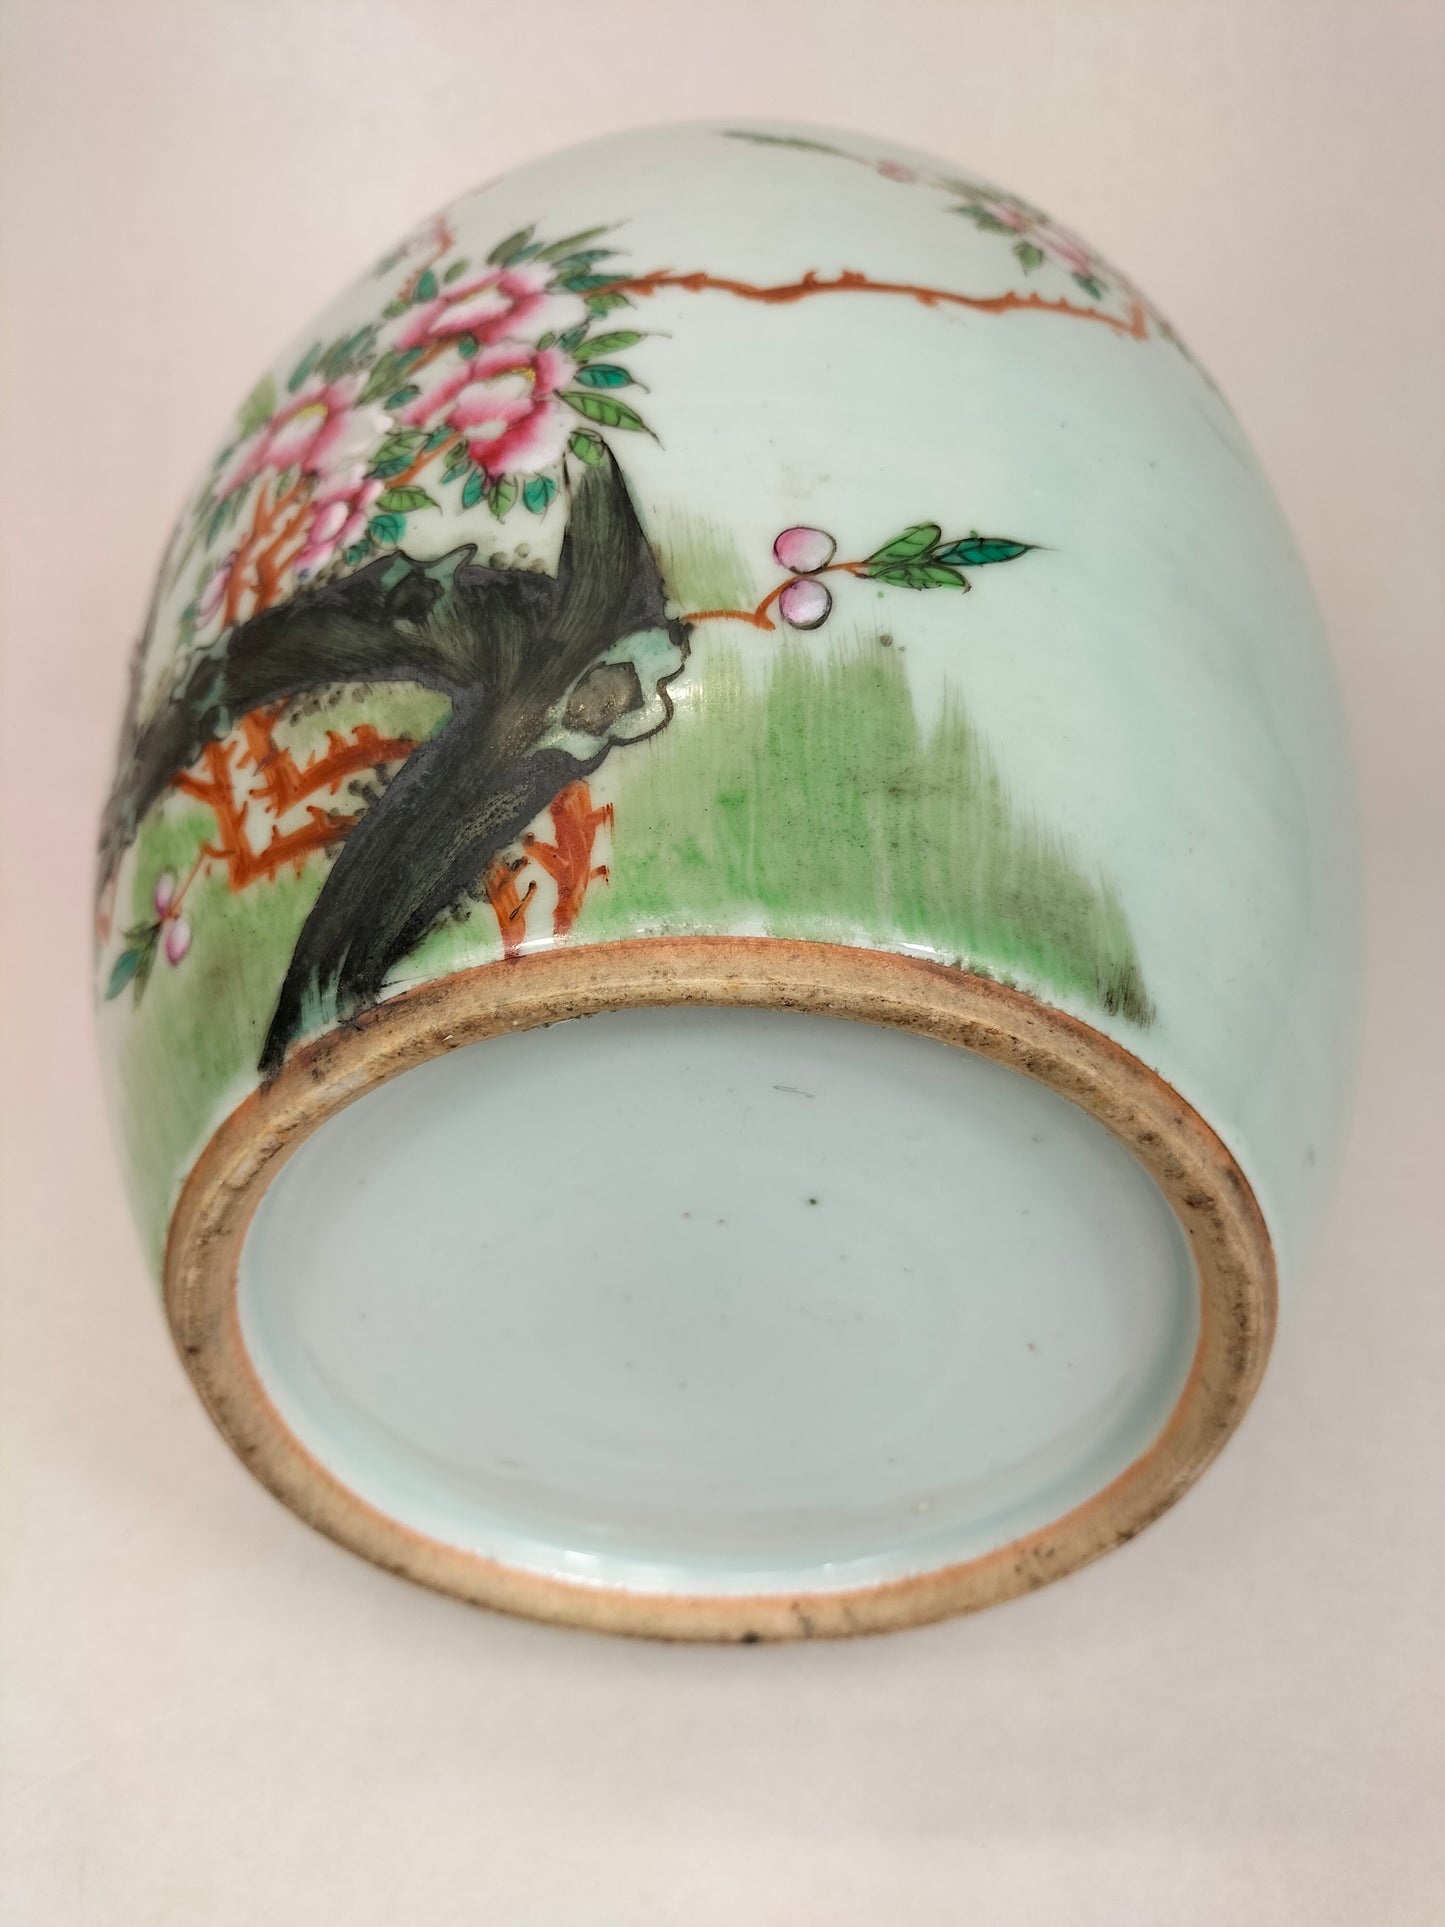 Antique Chinese ginger jar decorated with birds and flowers // Republic Period (1912-1949)